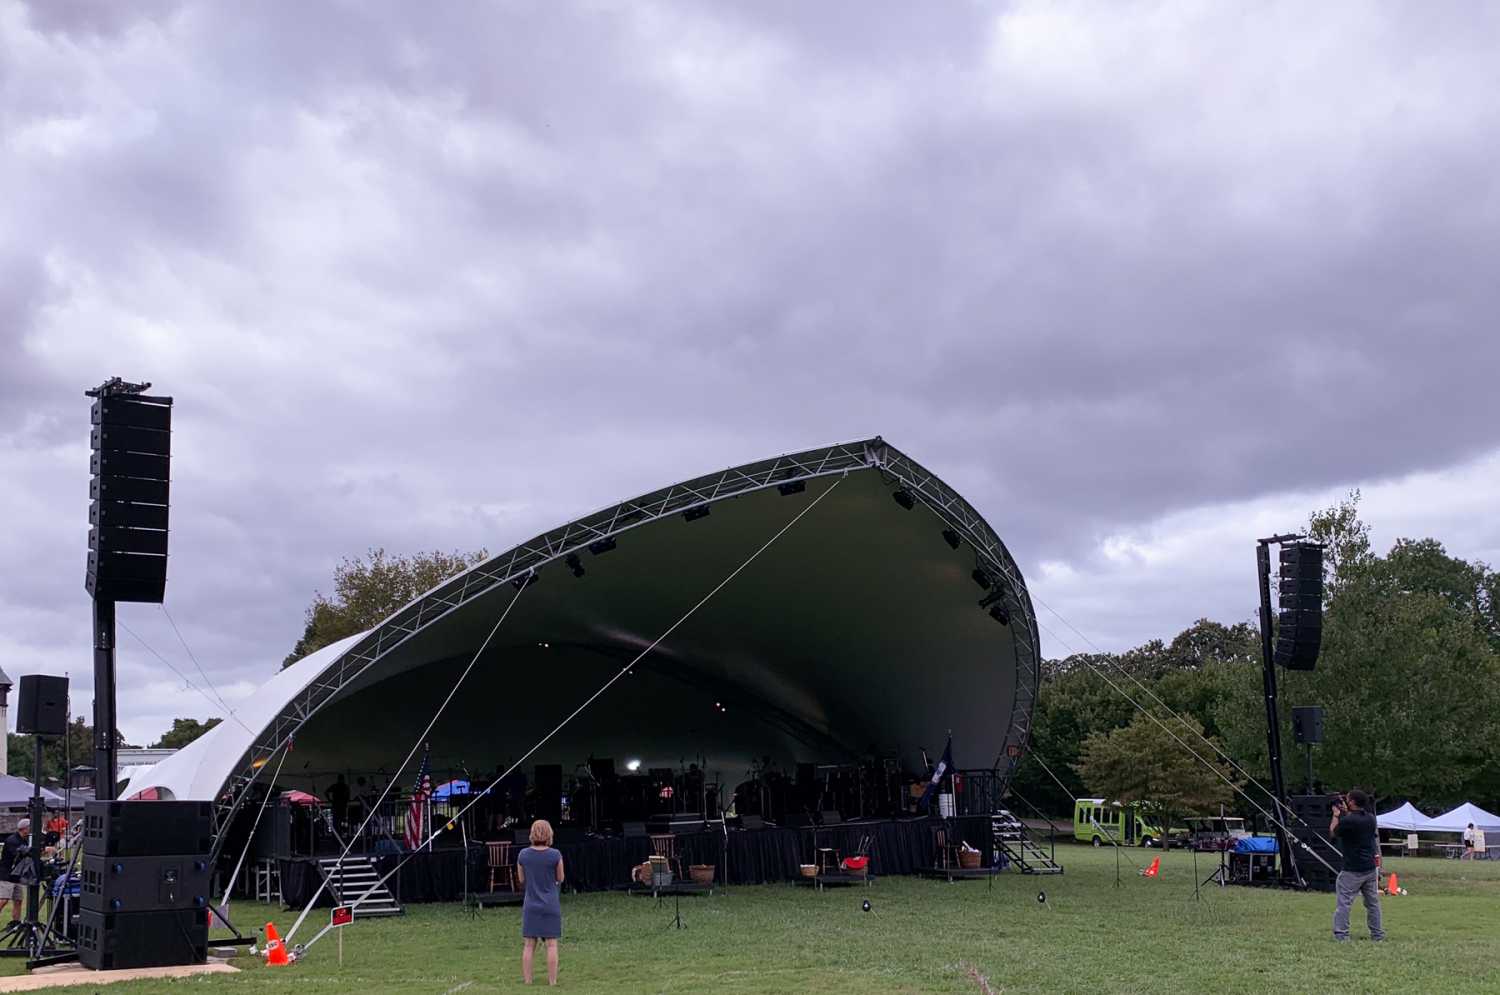 Soundworks used the 12 September show at Maymont Park to evaluate the power of WPS